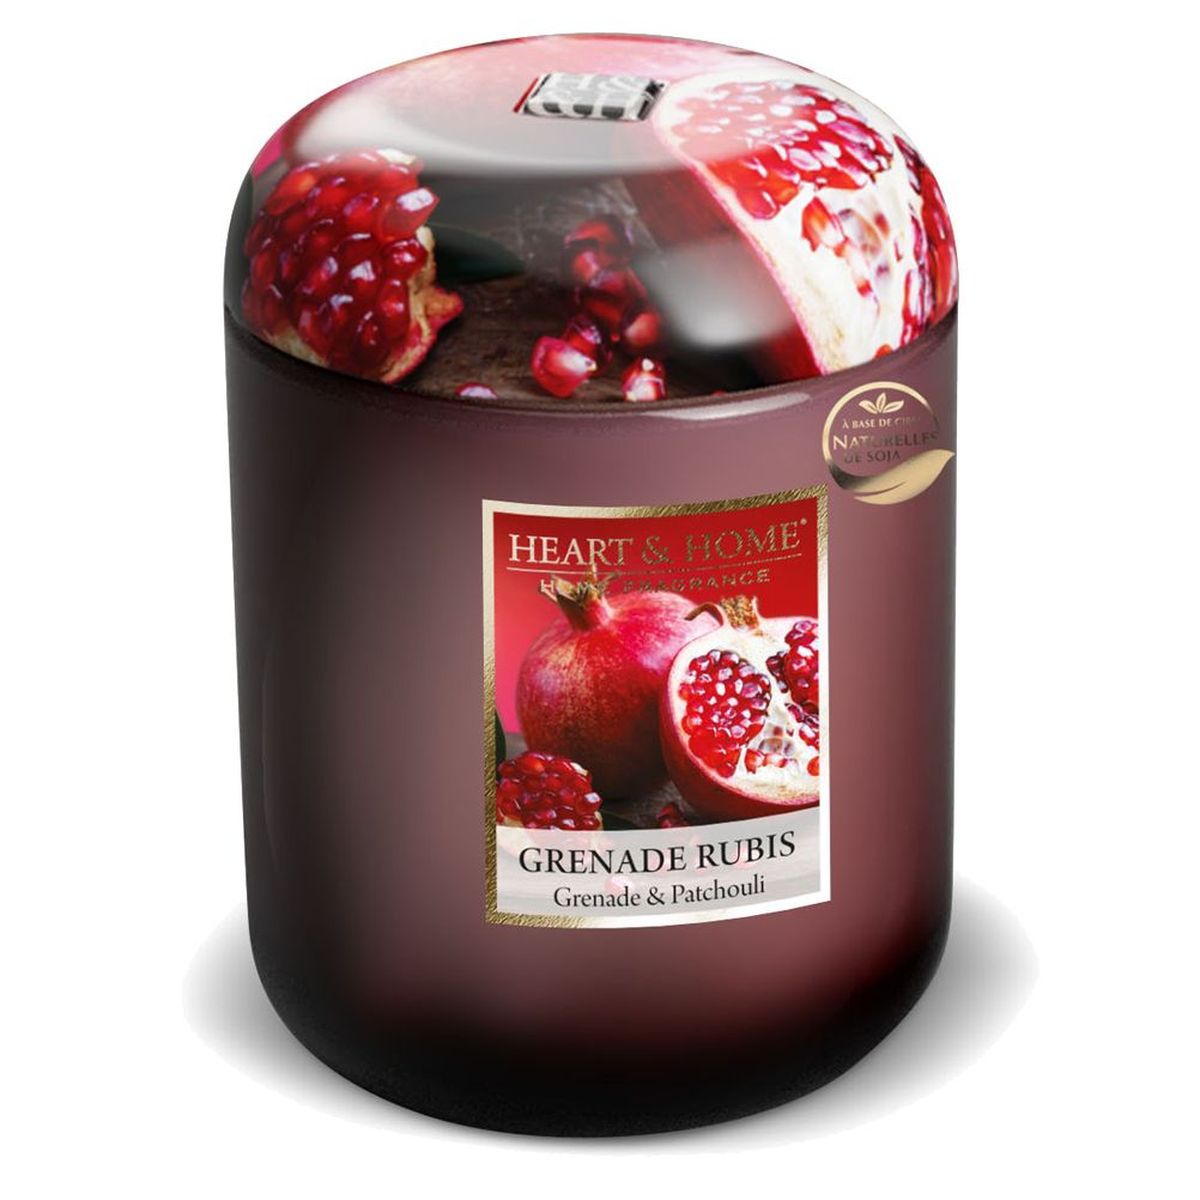 Grande bougie Heart and Home 70 heures - Grenade Rubis